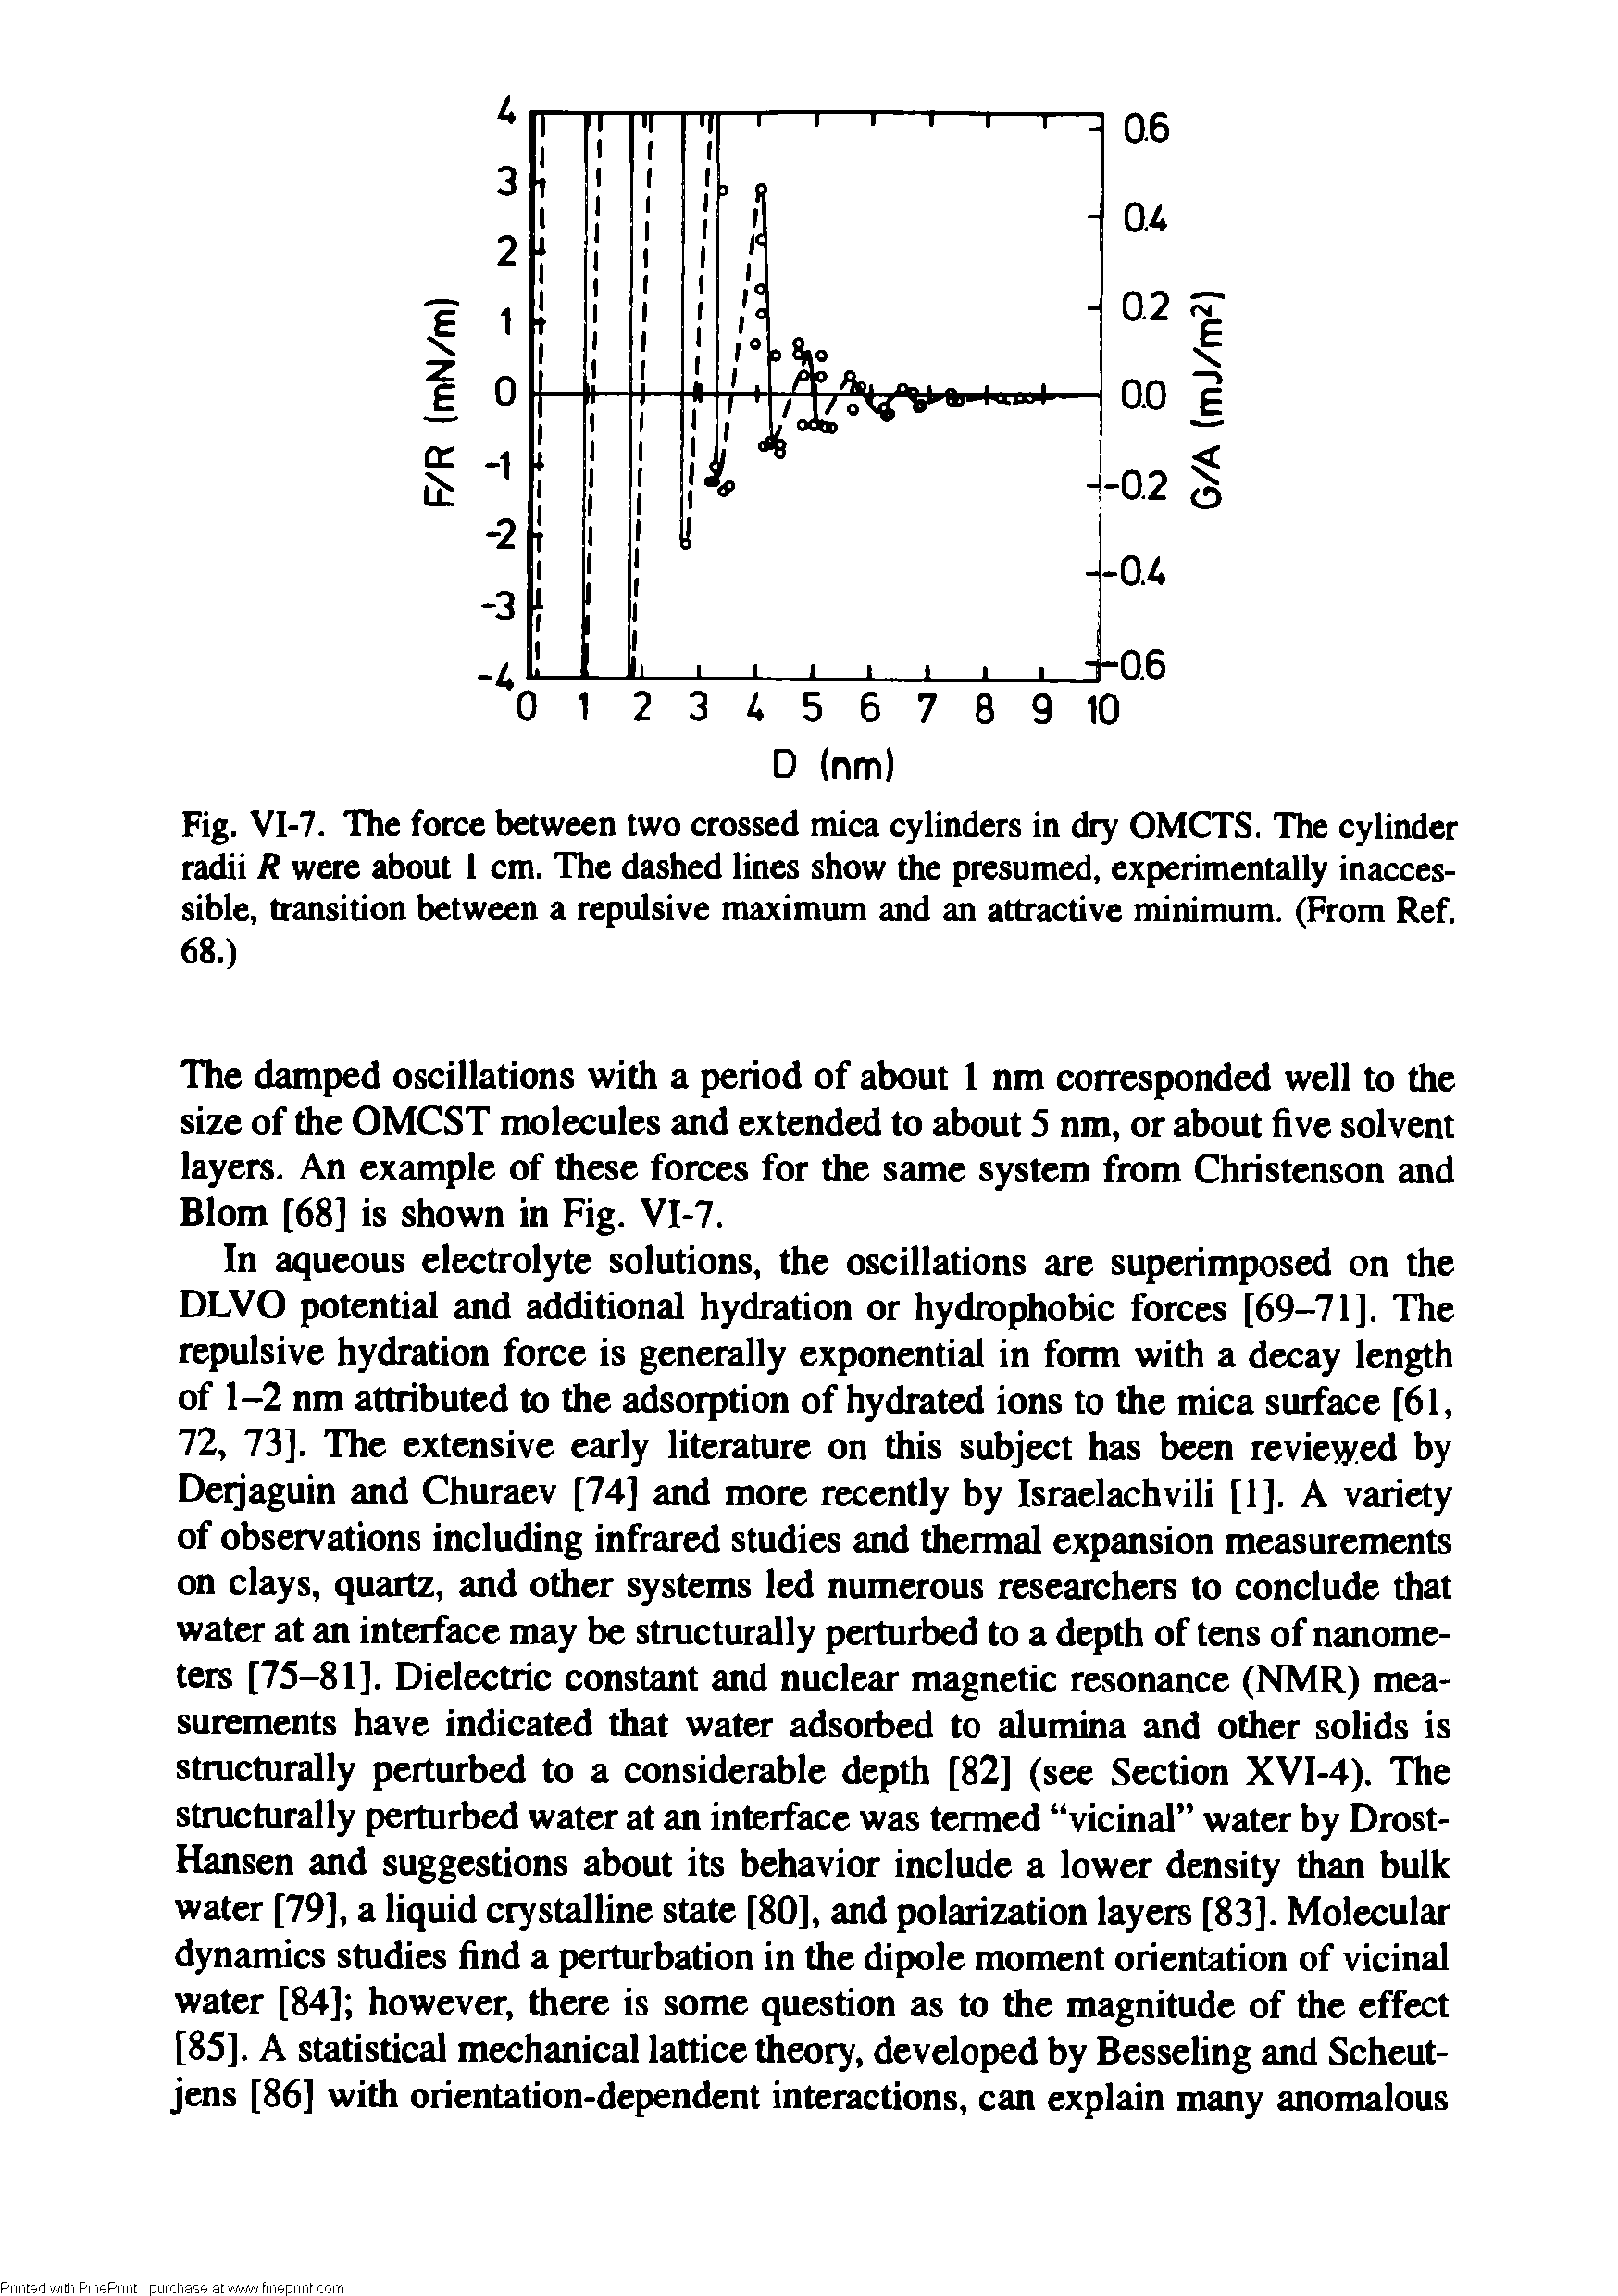 Fig. VI-7. The force between two crossed mica cylinders in dry OMCTS. The cylinder radii R were about 1 cm. The dashed lines show the presumed, experimentally inaccessible, transition between a repulsive maximum and an attractive minimum. (From Ref. 68.)...